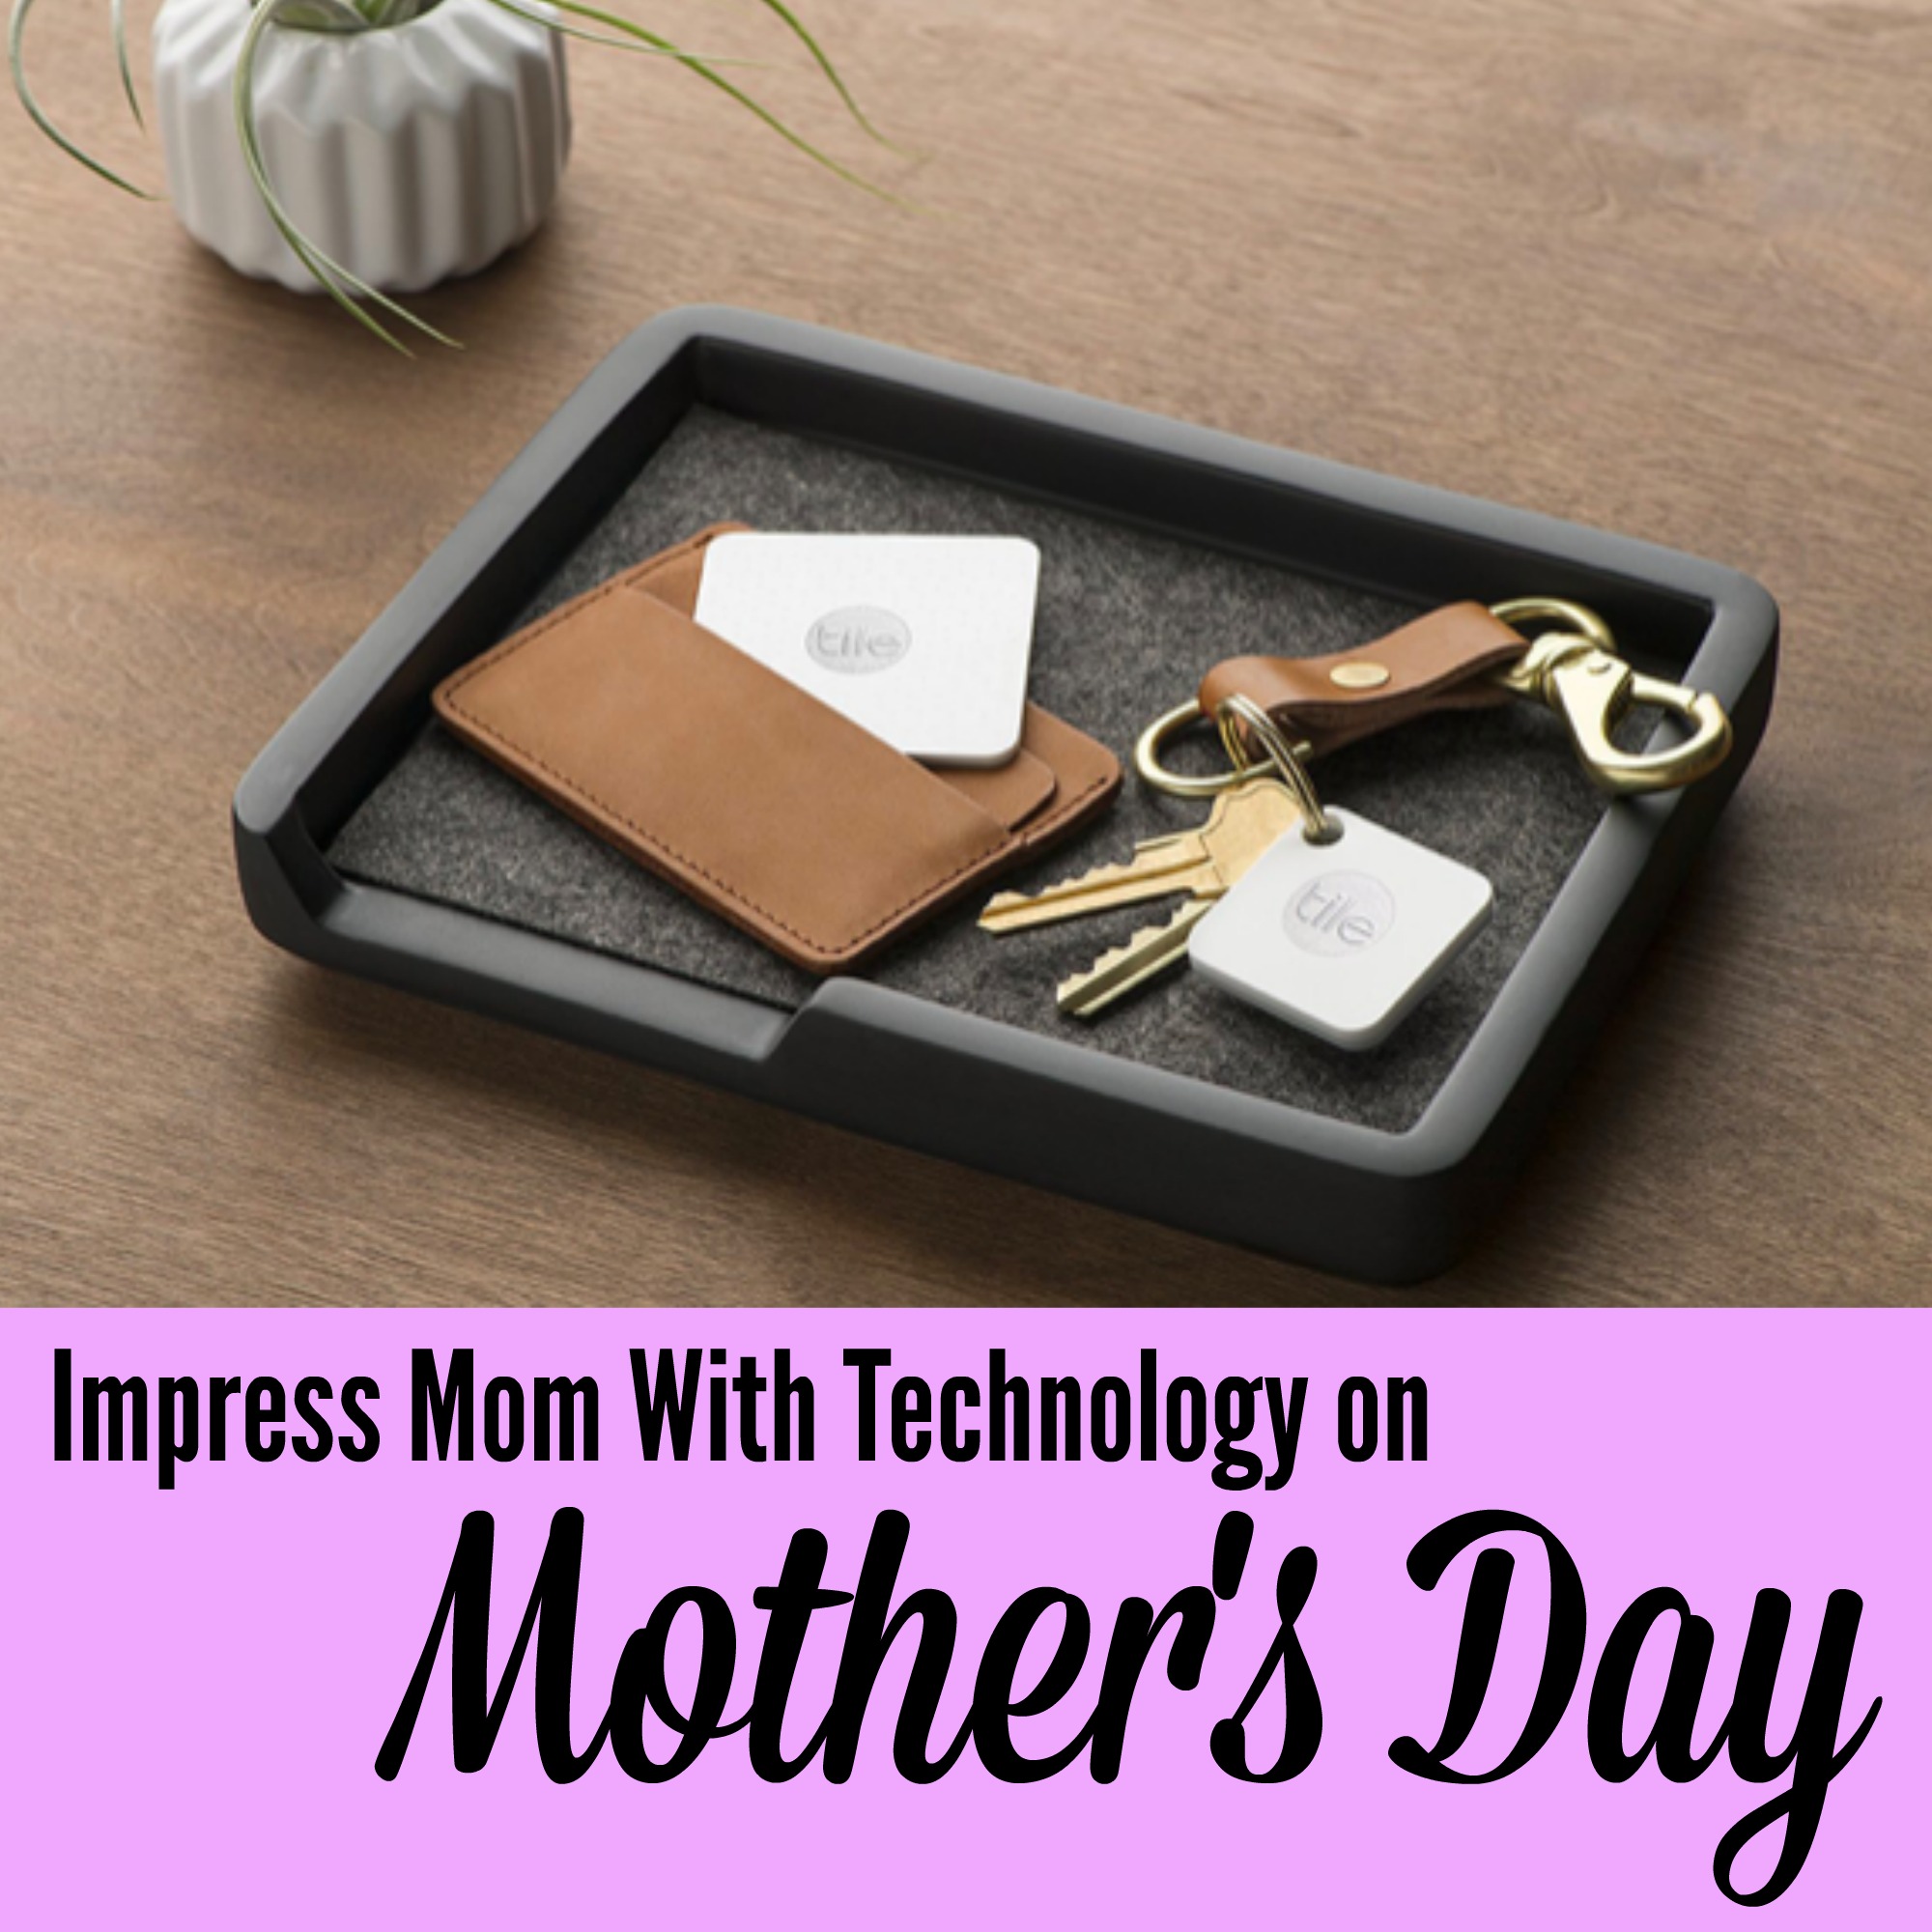 Impress Mom With Technology On Mother's Day